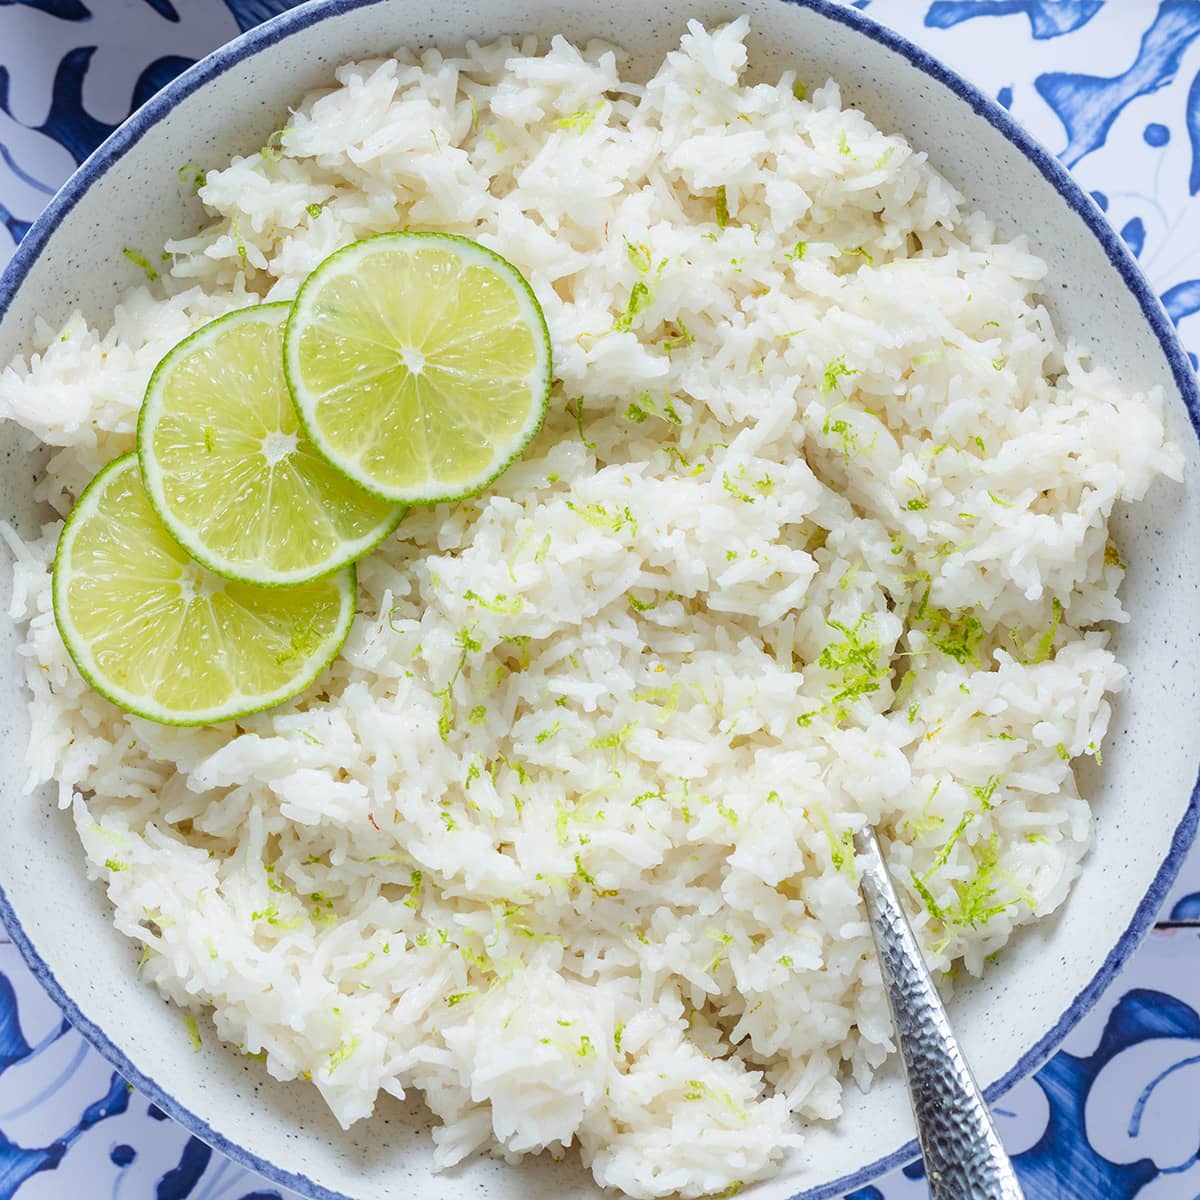 Coconut lime rice garnished with lime slices in a white bowl with a blue edge on a blue tile background.